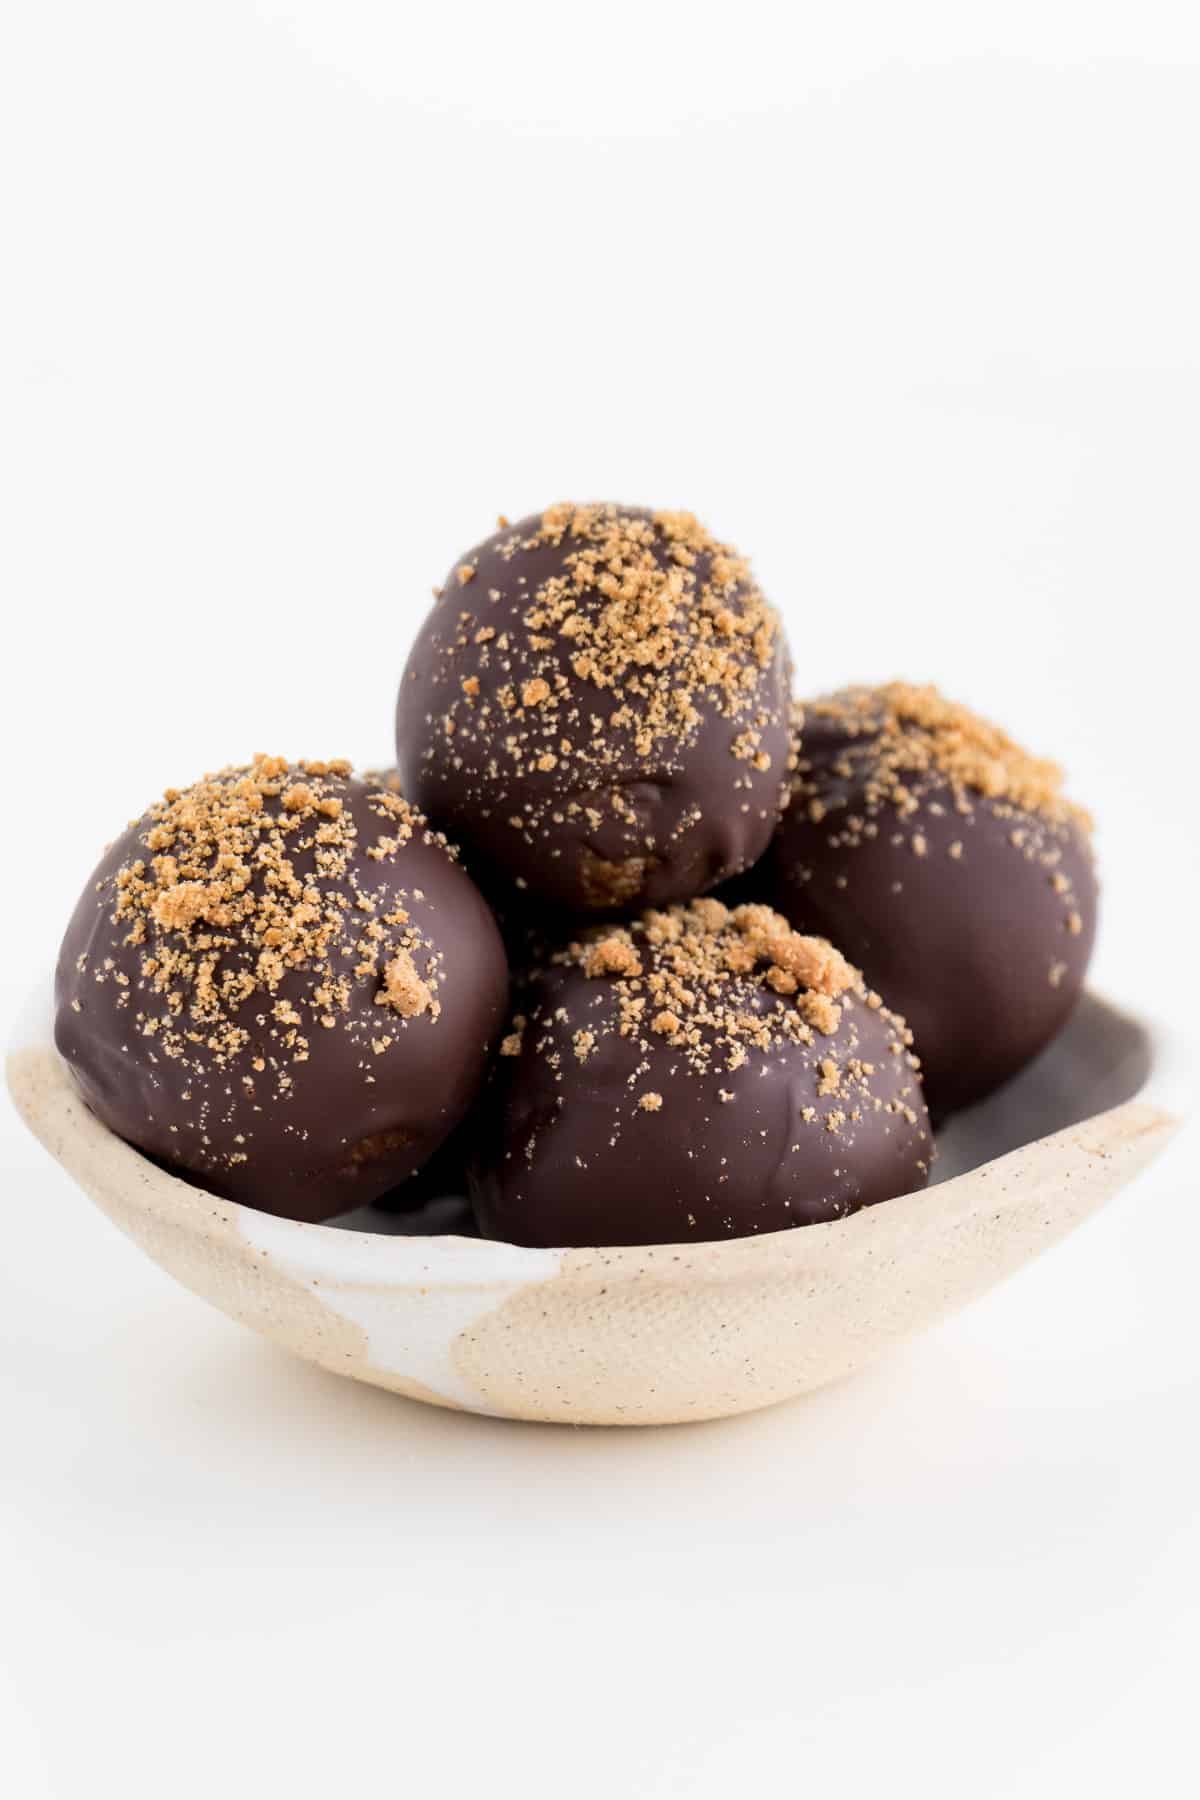 four chocolate gingerbread bliss balls stacked inside a cream and white ceramic bowl